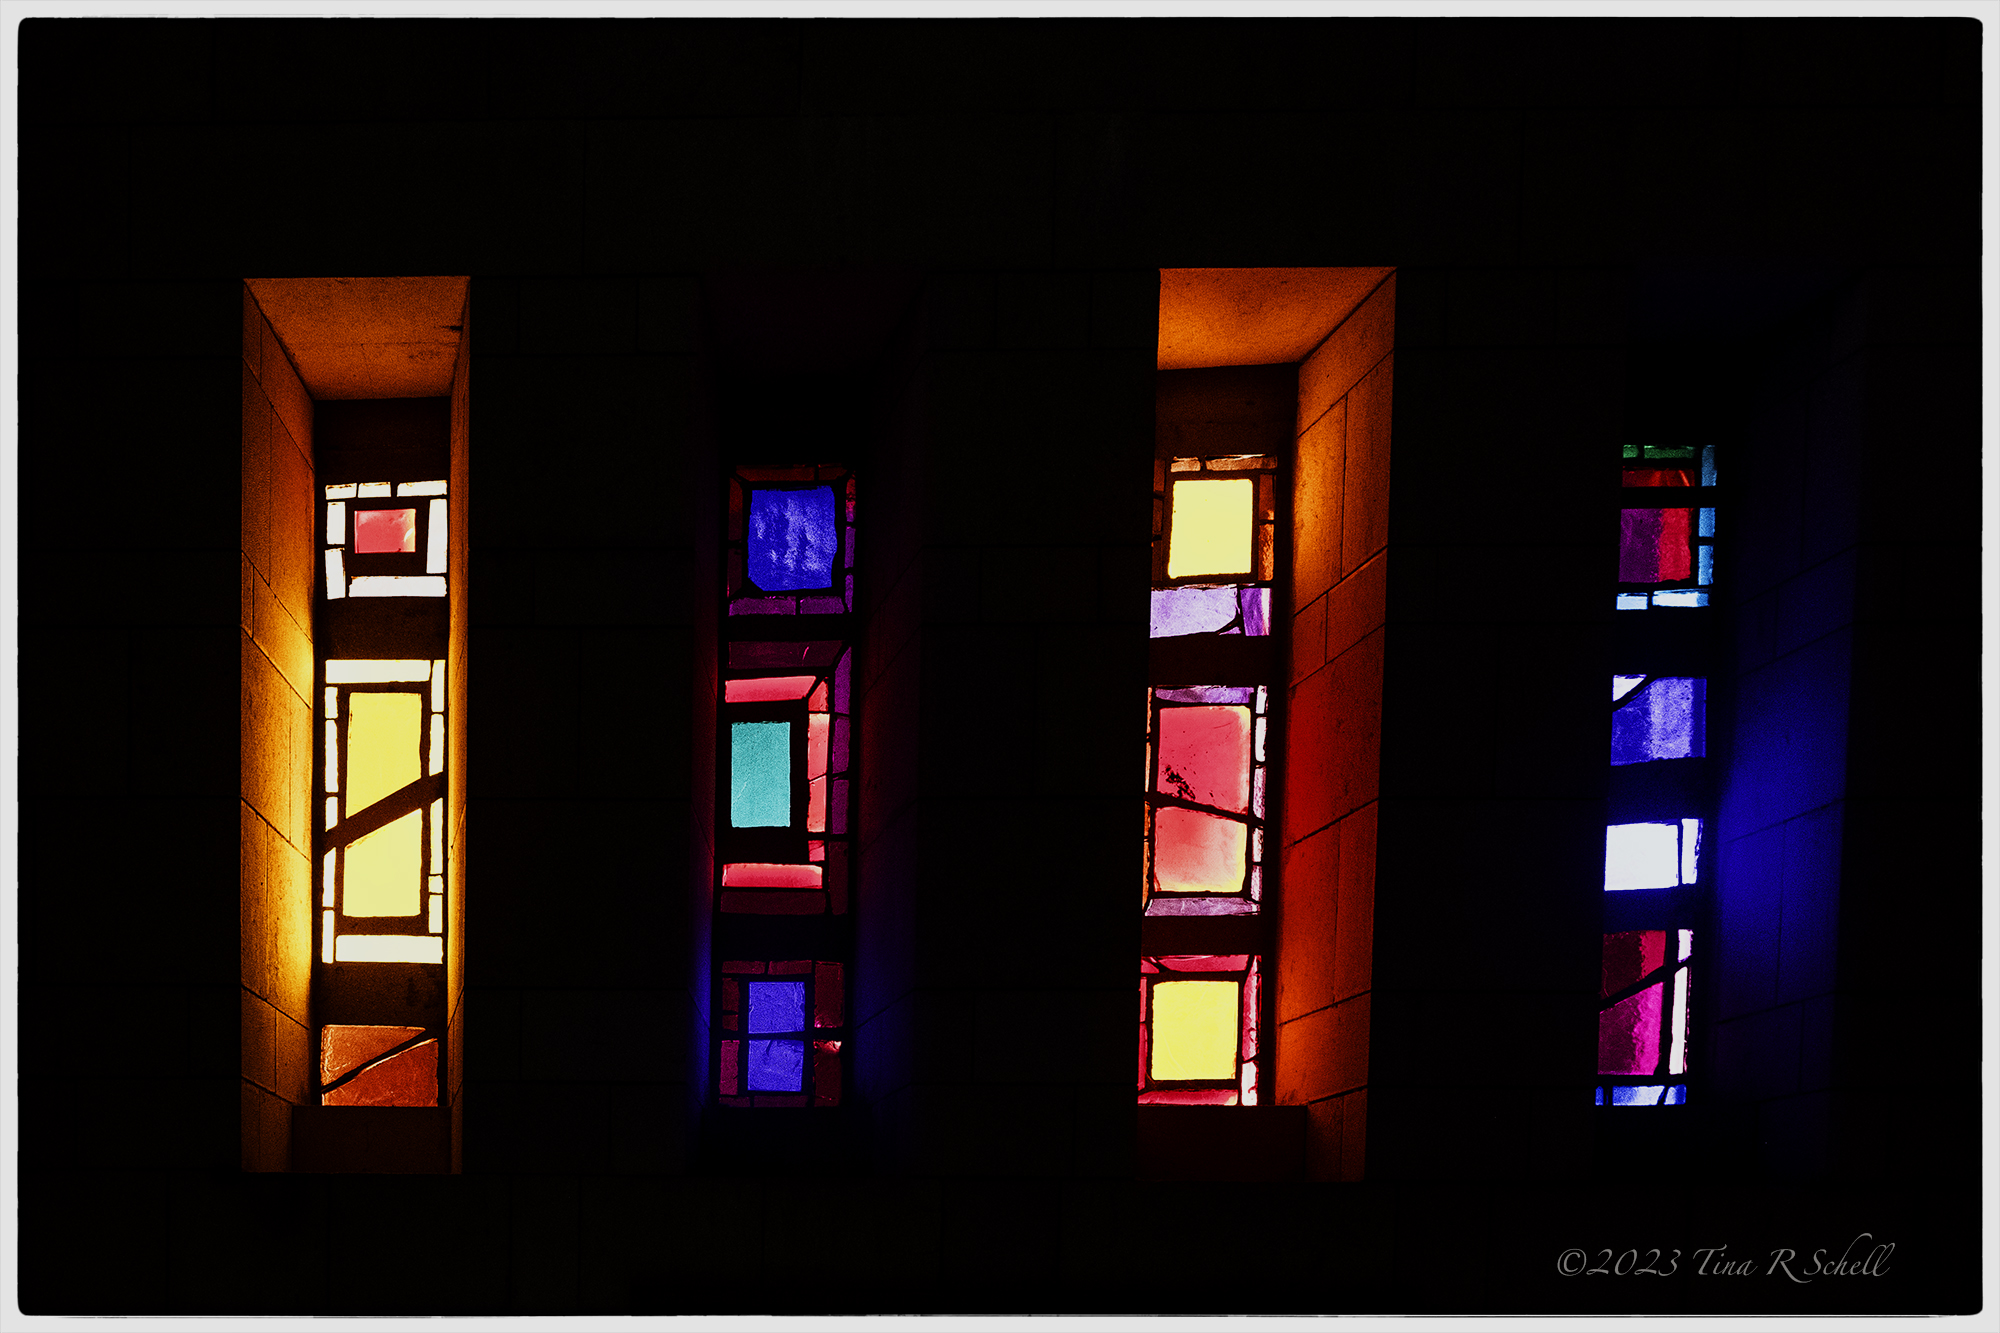 windows, stained glass, four, colorful, glow

